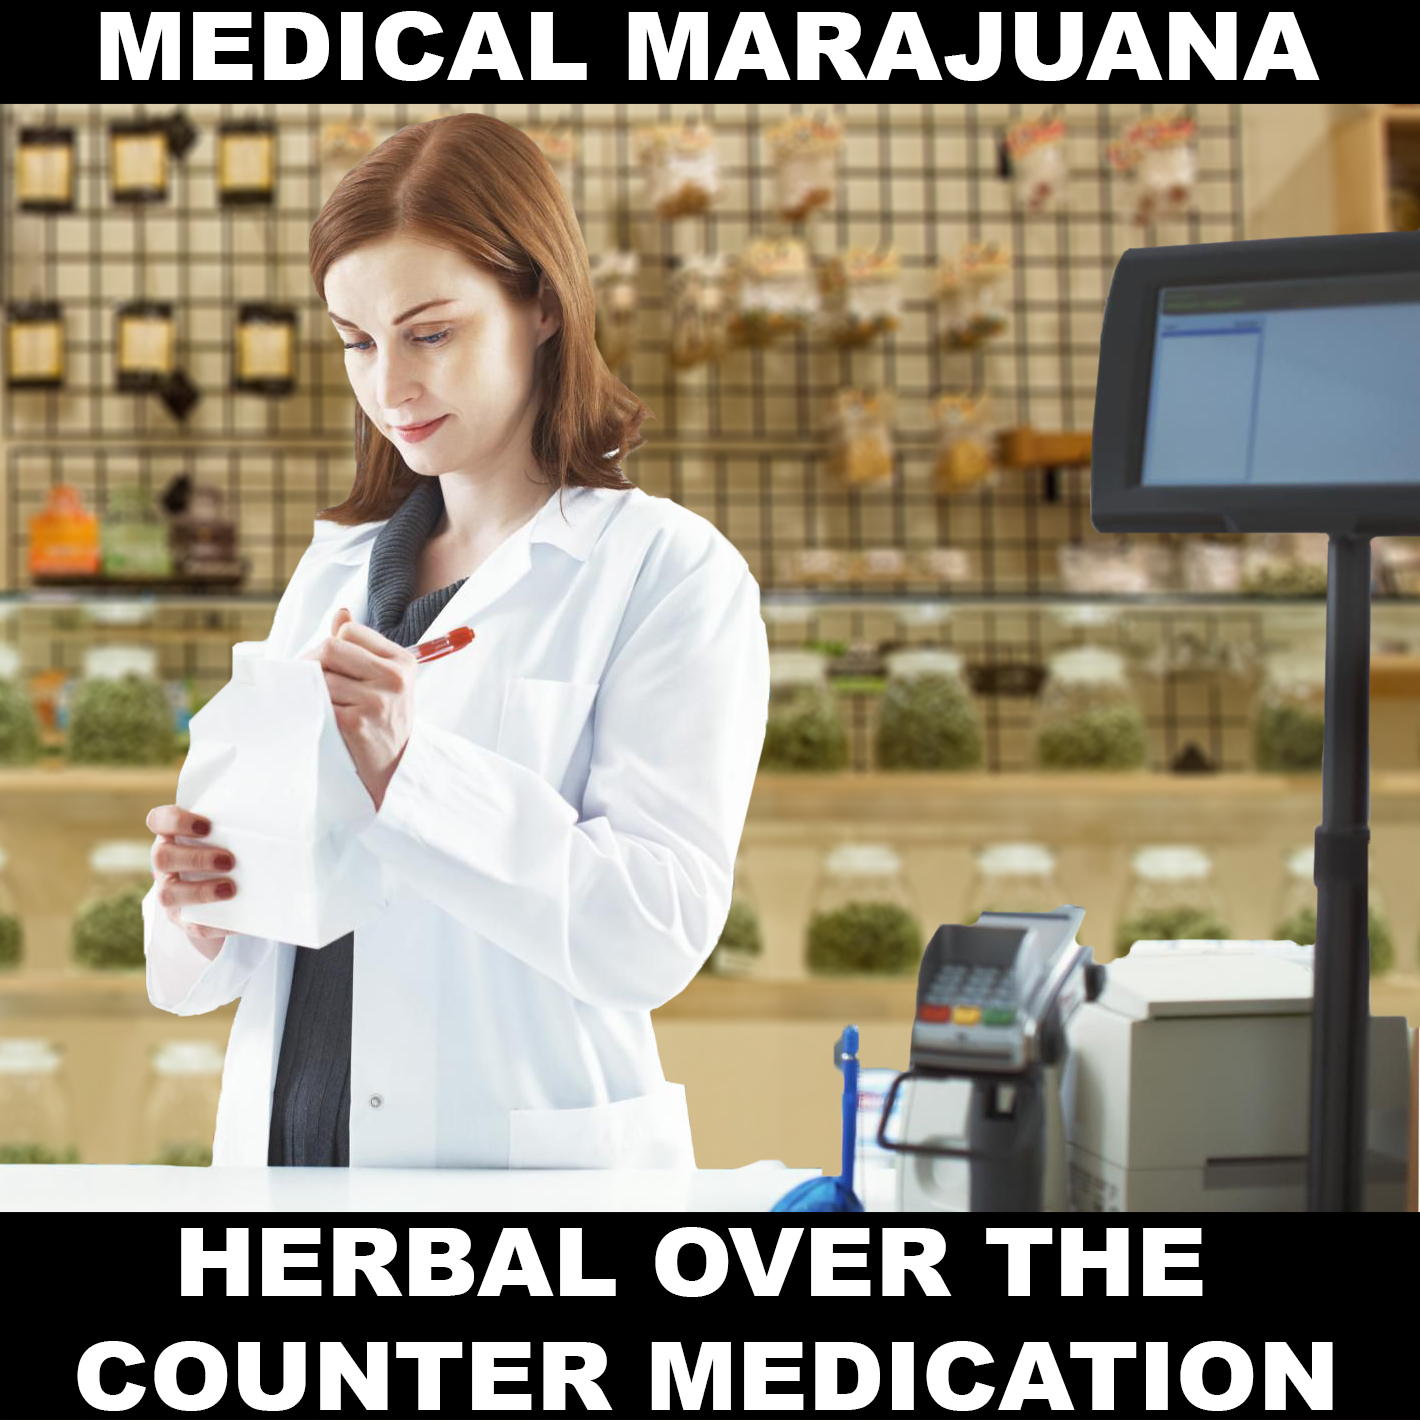 VA refers to MMJ as Herbal Over the Counter Medication!